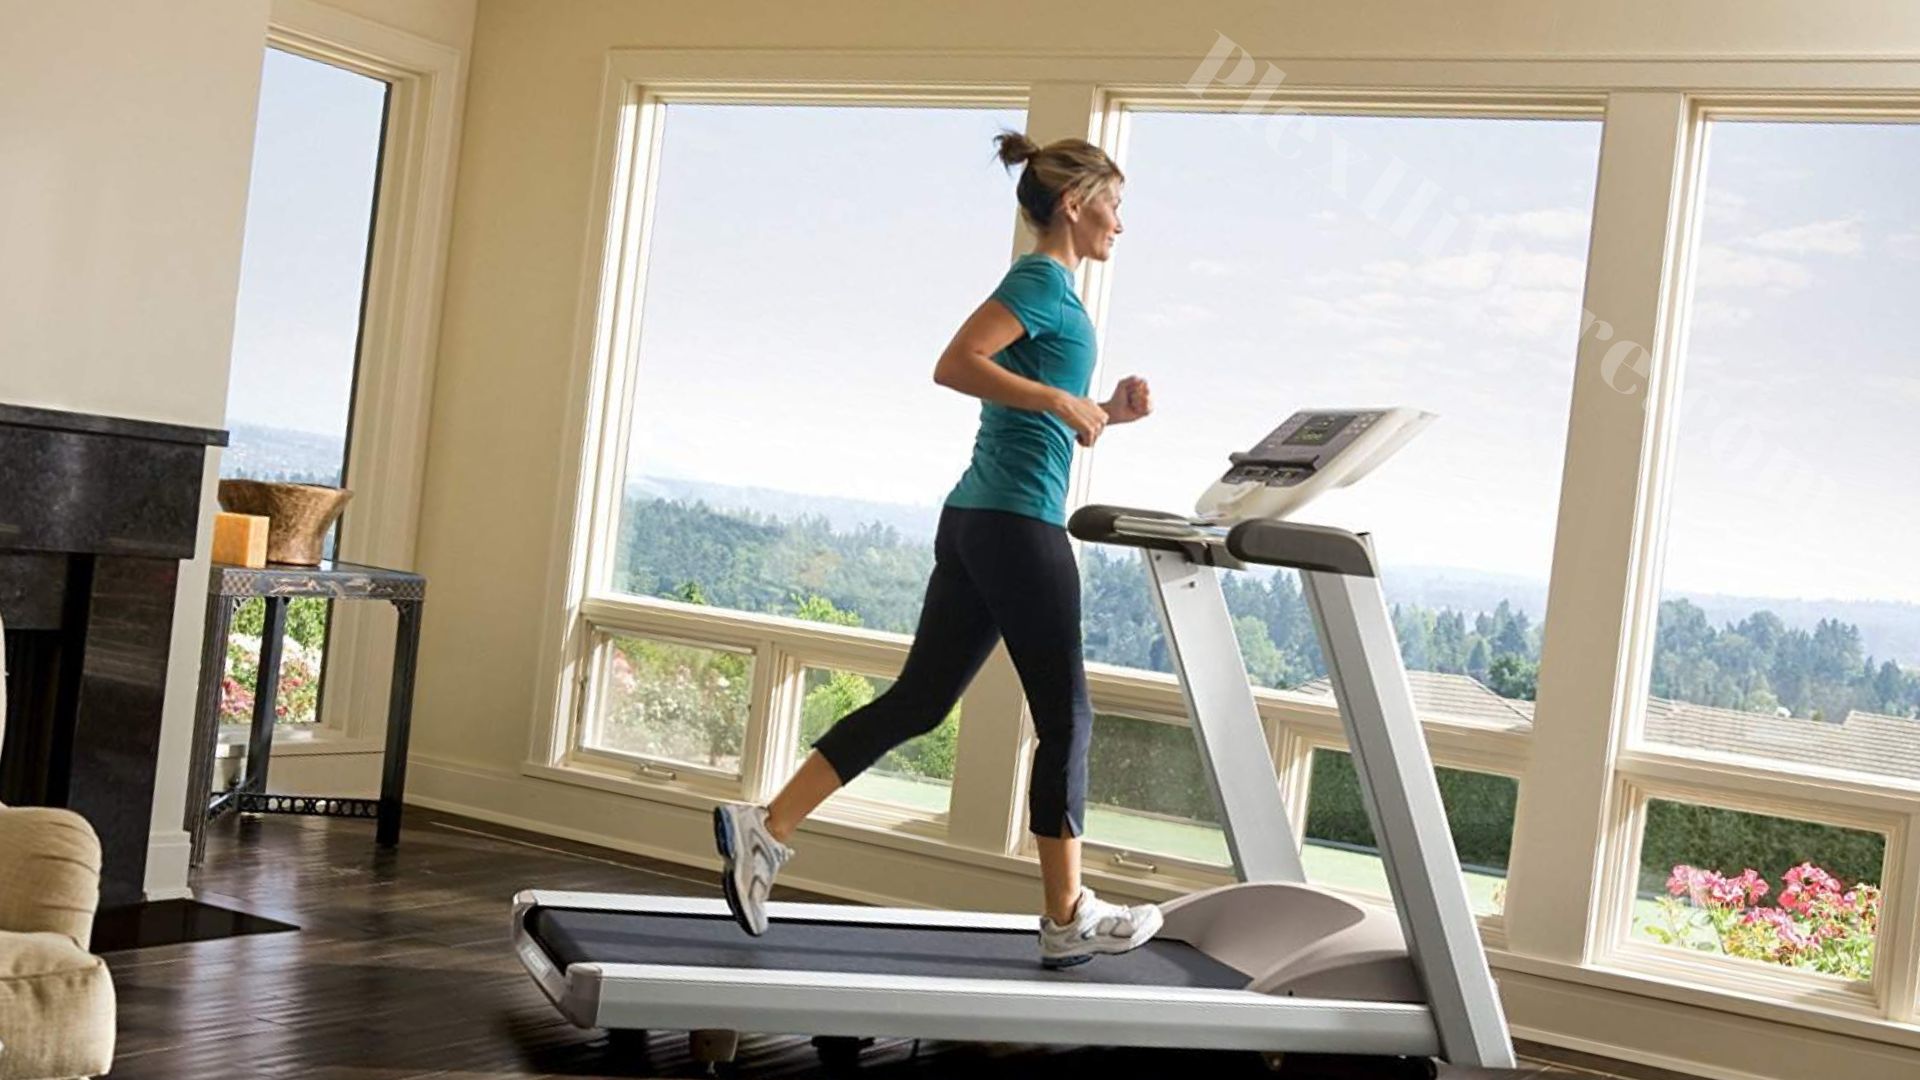 What Will Happen if You Do Treadmill Everyday?